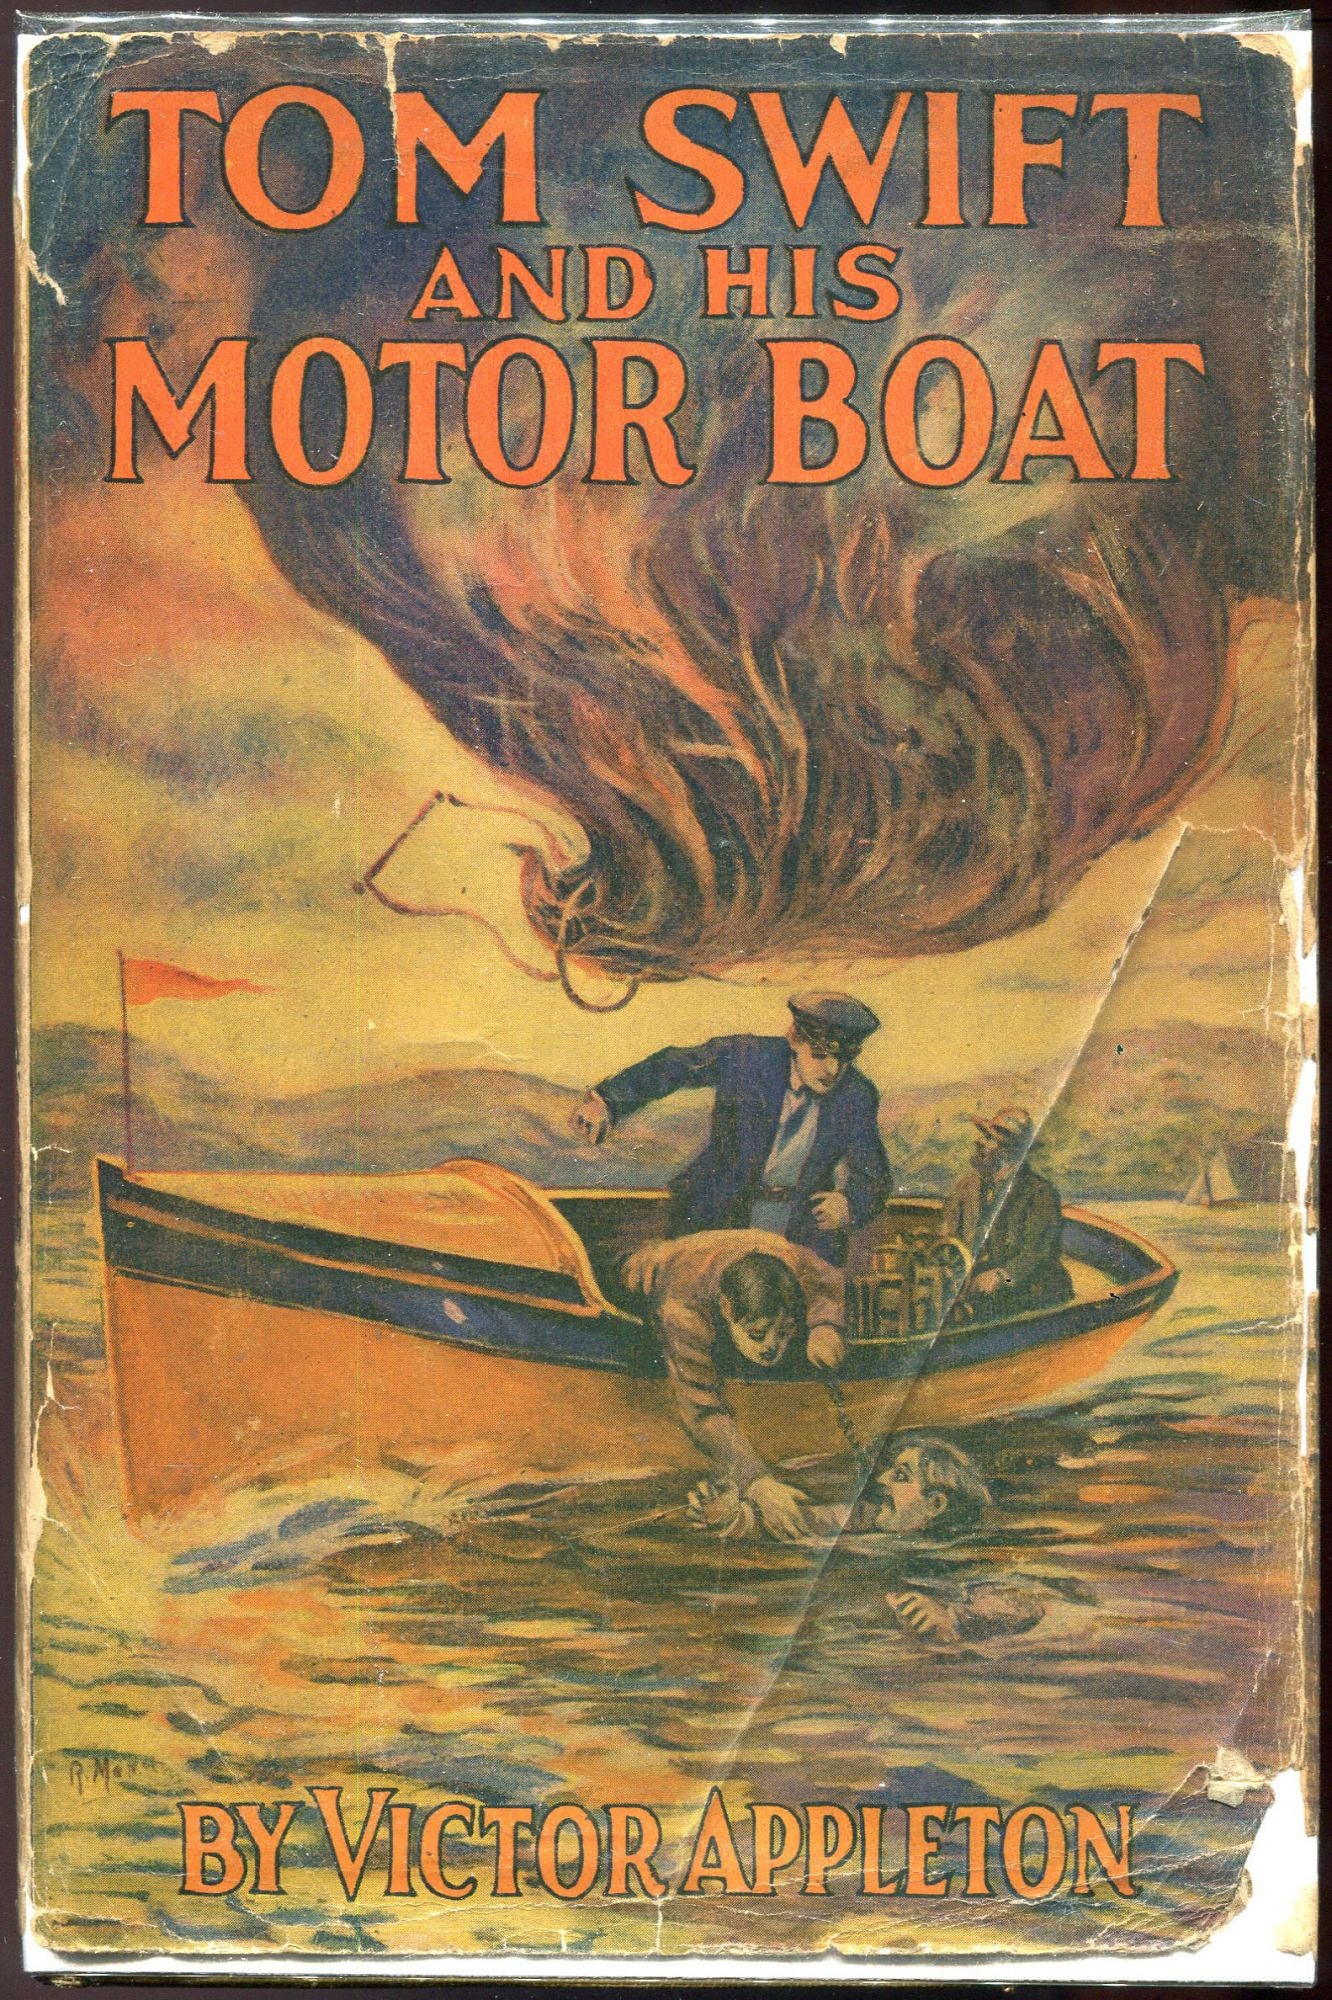 Appleton　Tom　Victor　Boat　Reprint　Swift　His　and　Motor